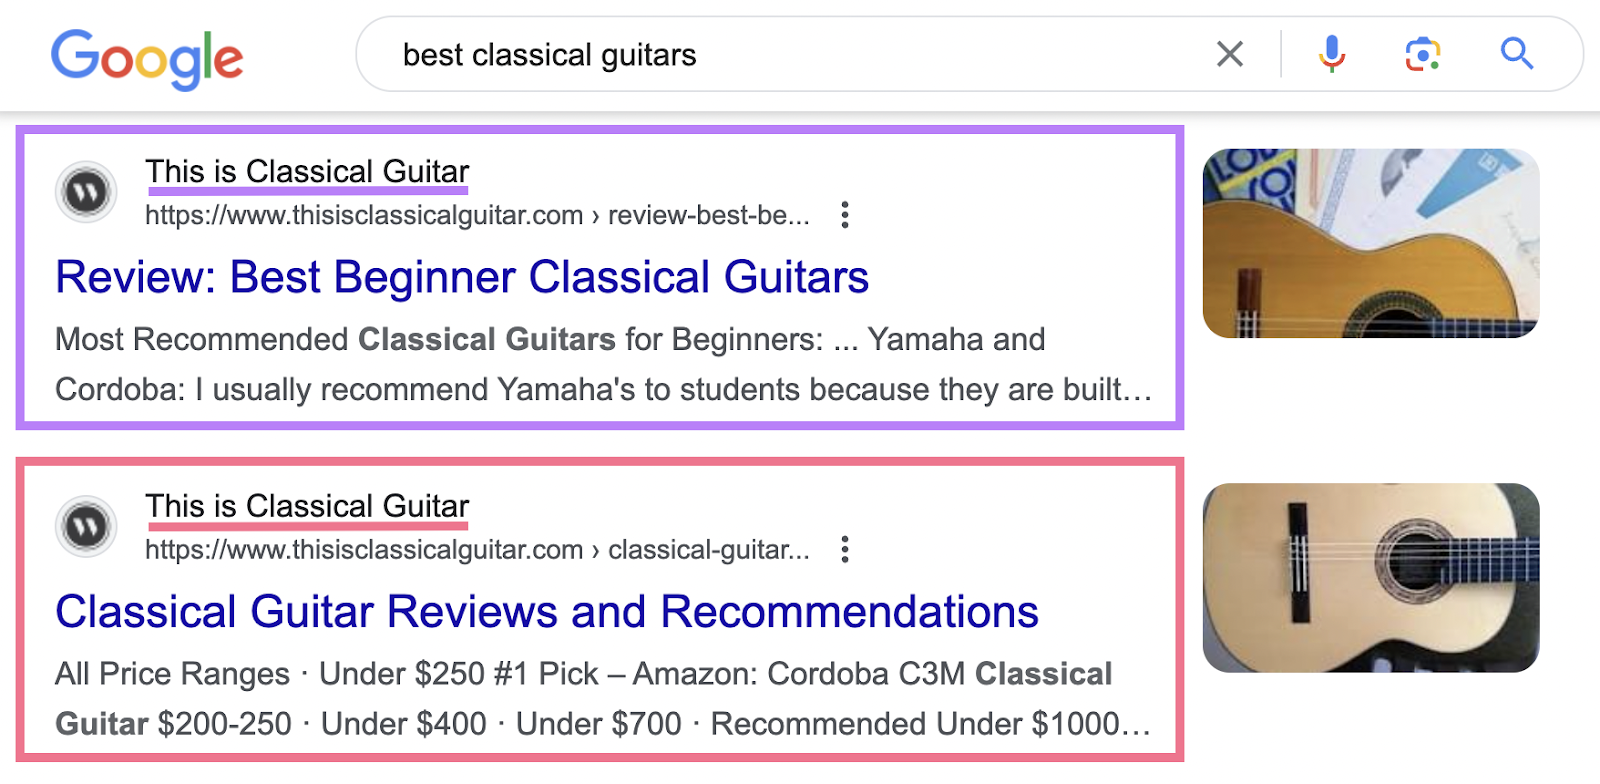 Google SERP shows two results from "This is Classical Guitar" page for "best classical guitars" query